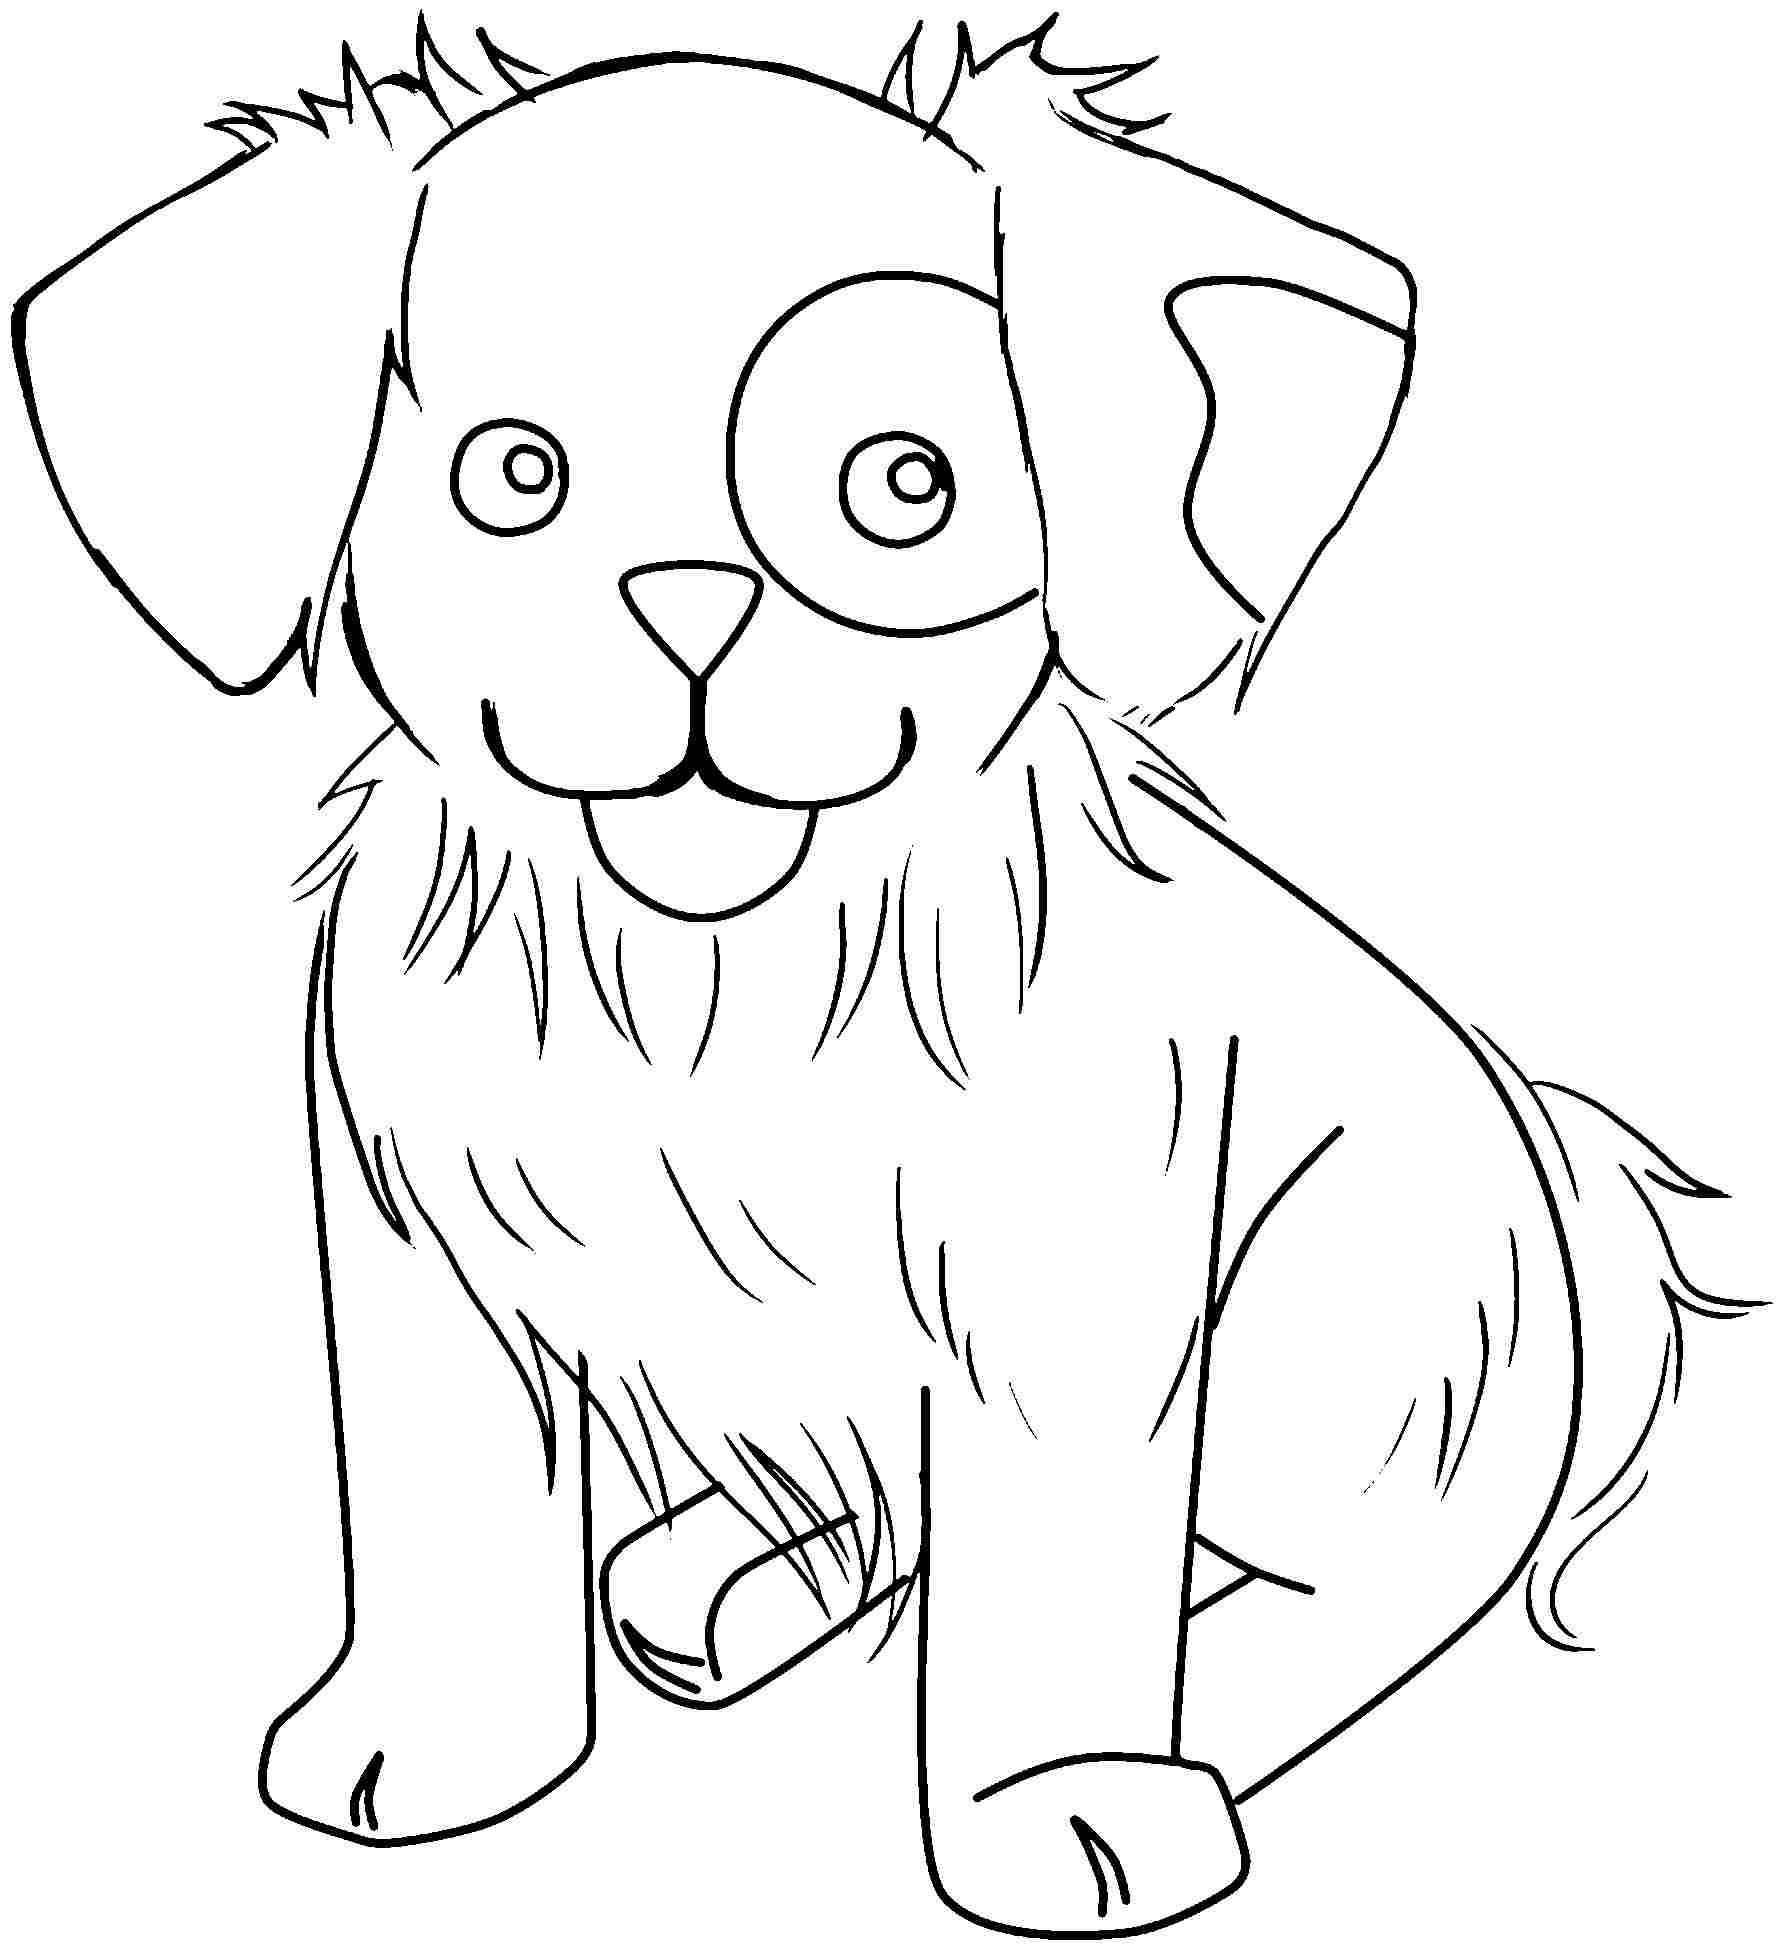 Animal Coloring Pages Printable Free - Coloring Home